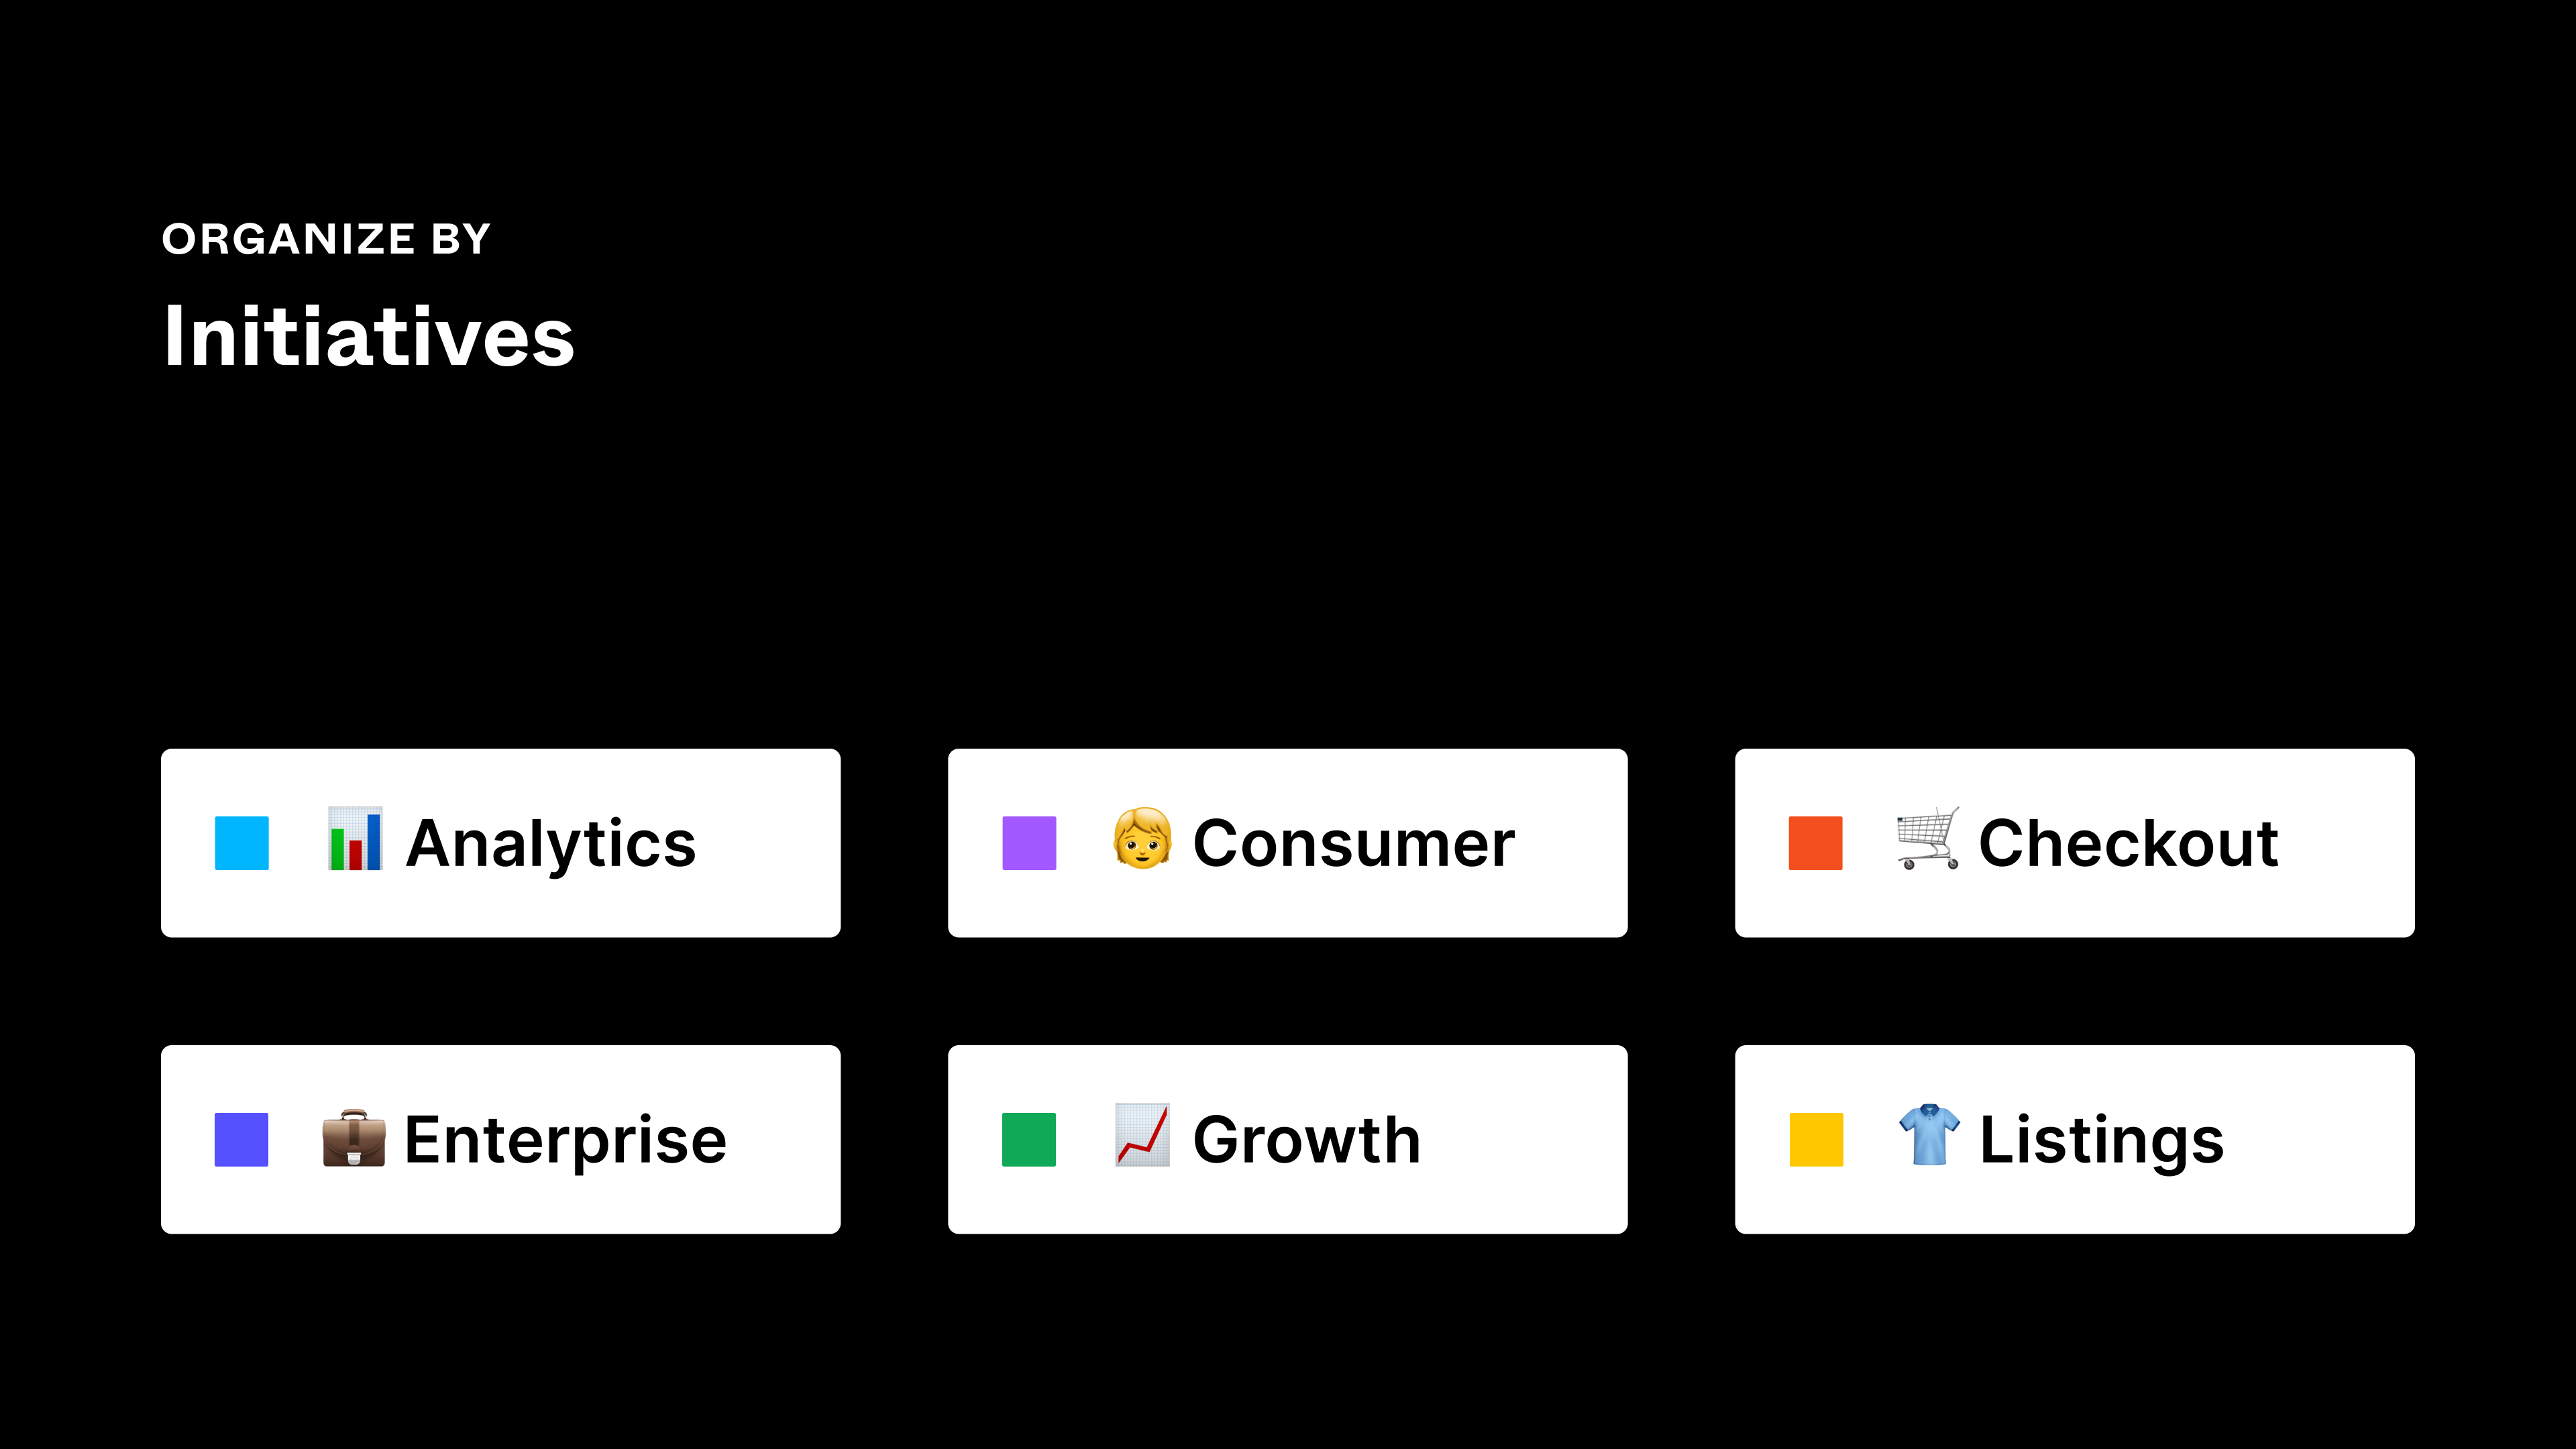 The title of the image is "Organize by Initiatives." There are six examples of initiatives: "Analytics," "Consumer," "Checkout," "Enterprise," "Growth," "Listings."